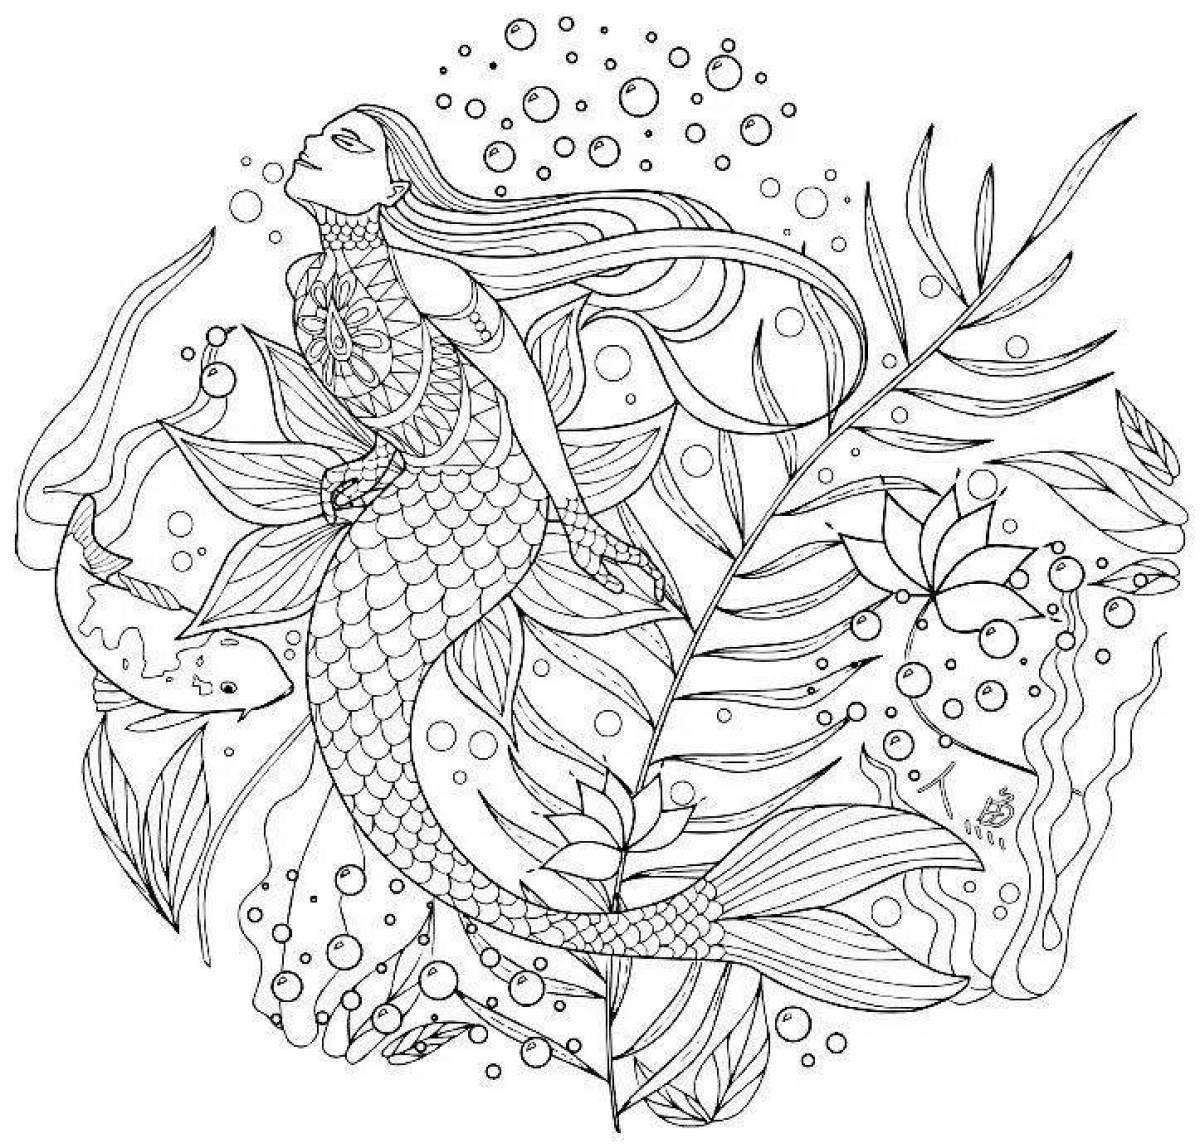 Soothing anti-stress coloring book for women